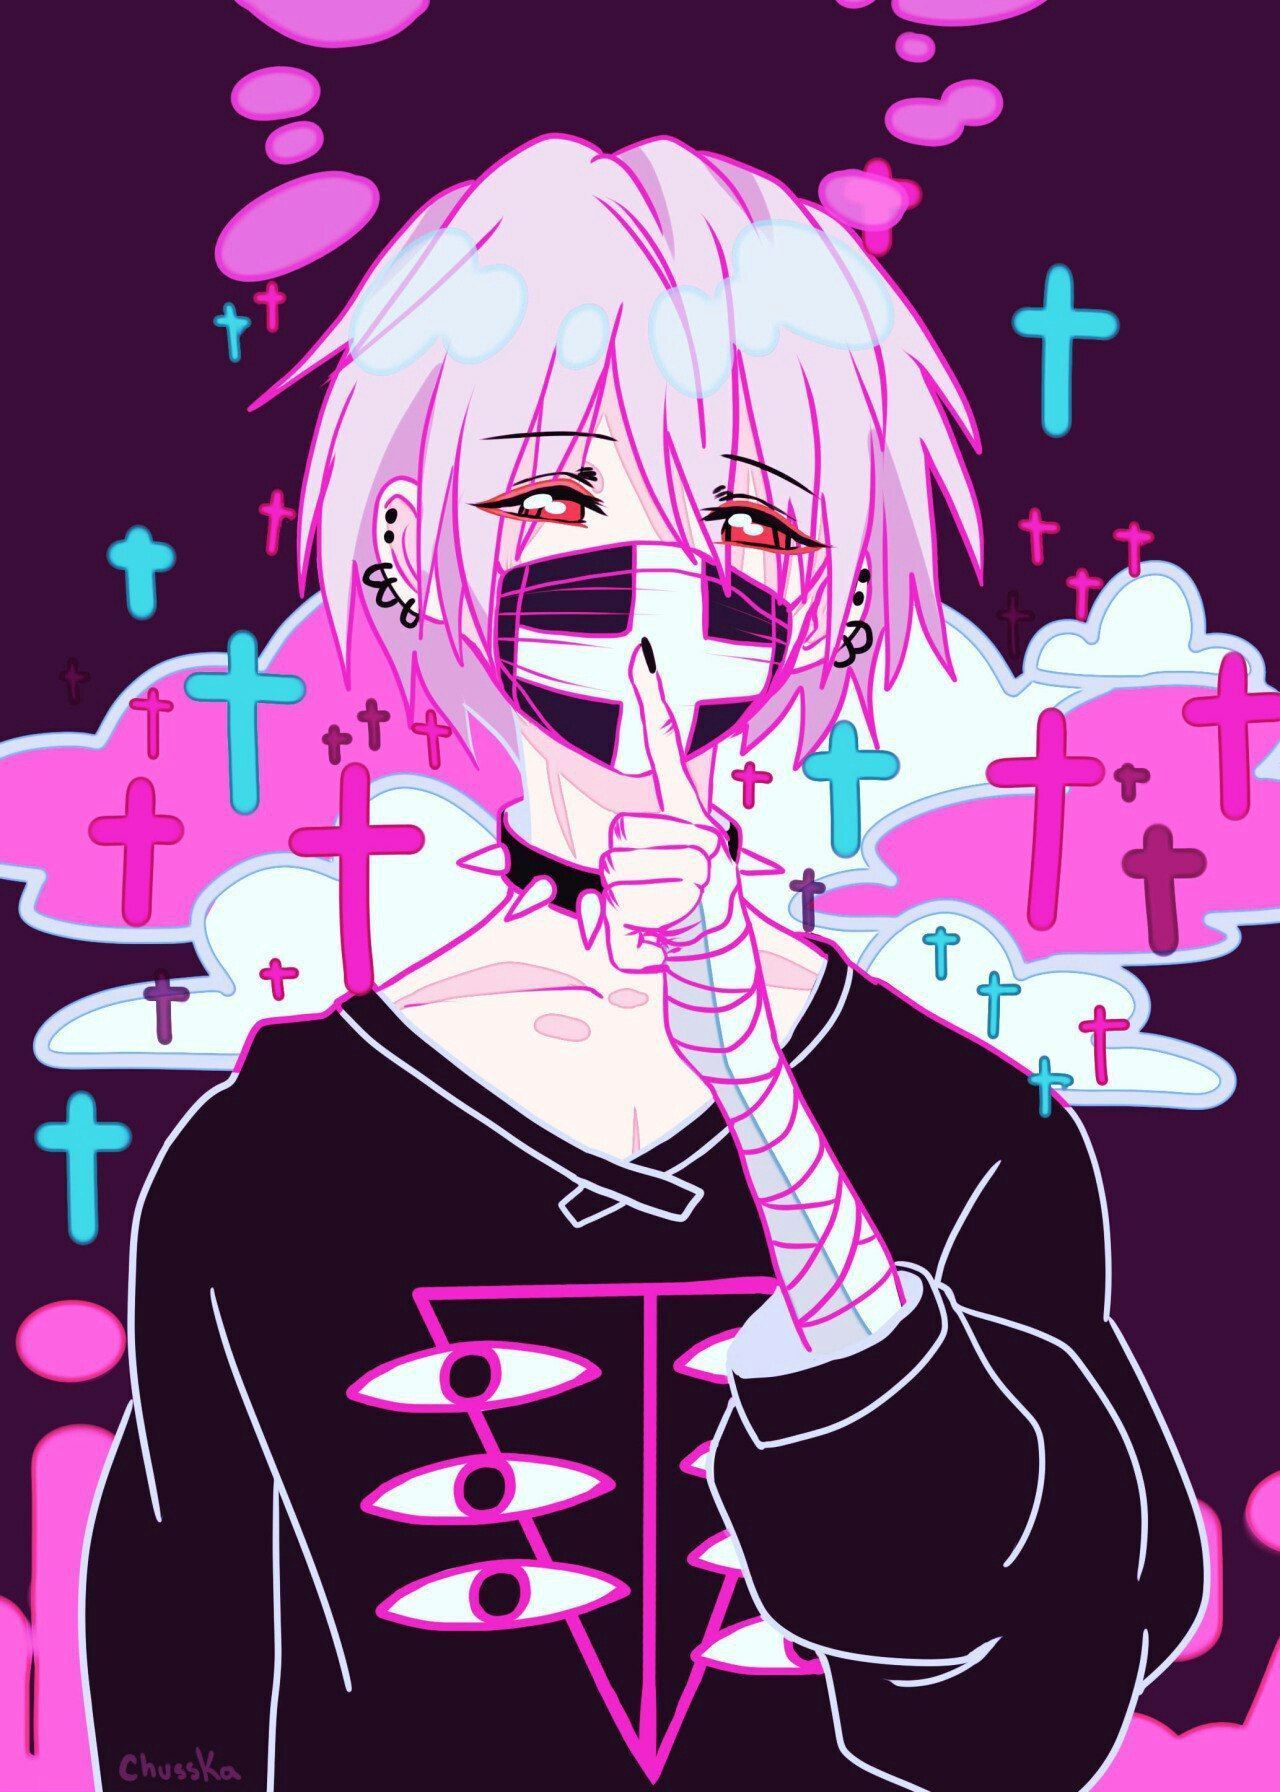 Pastel Goth Anime Wallpapers